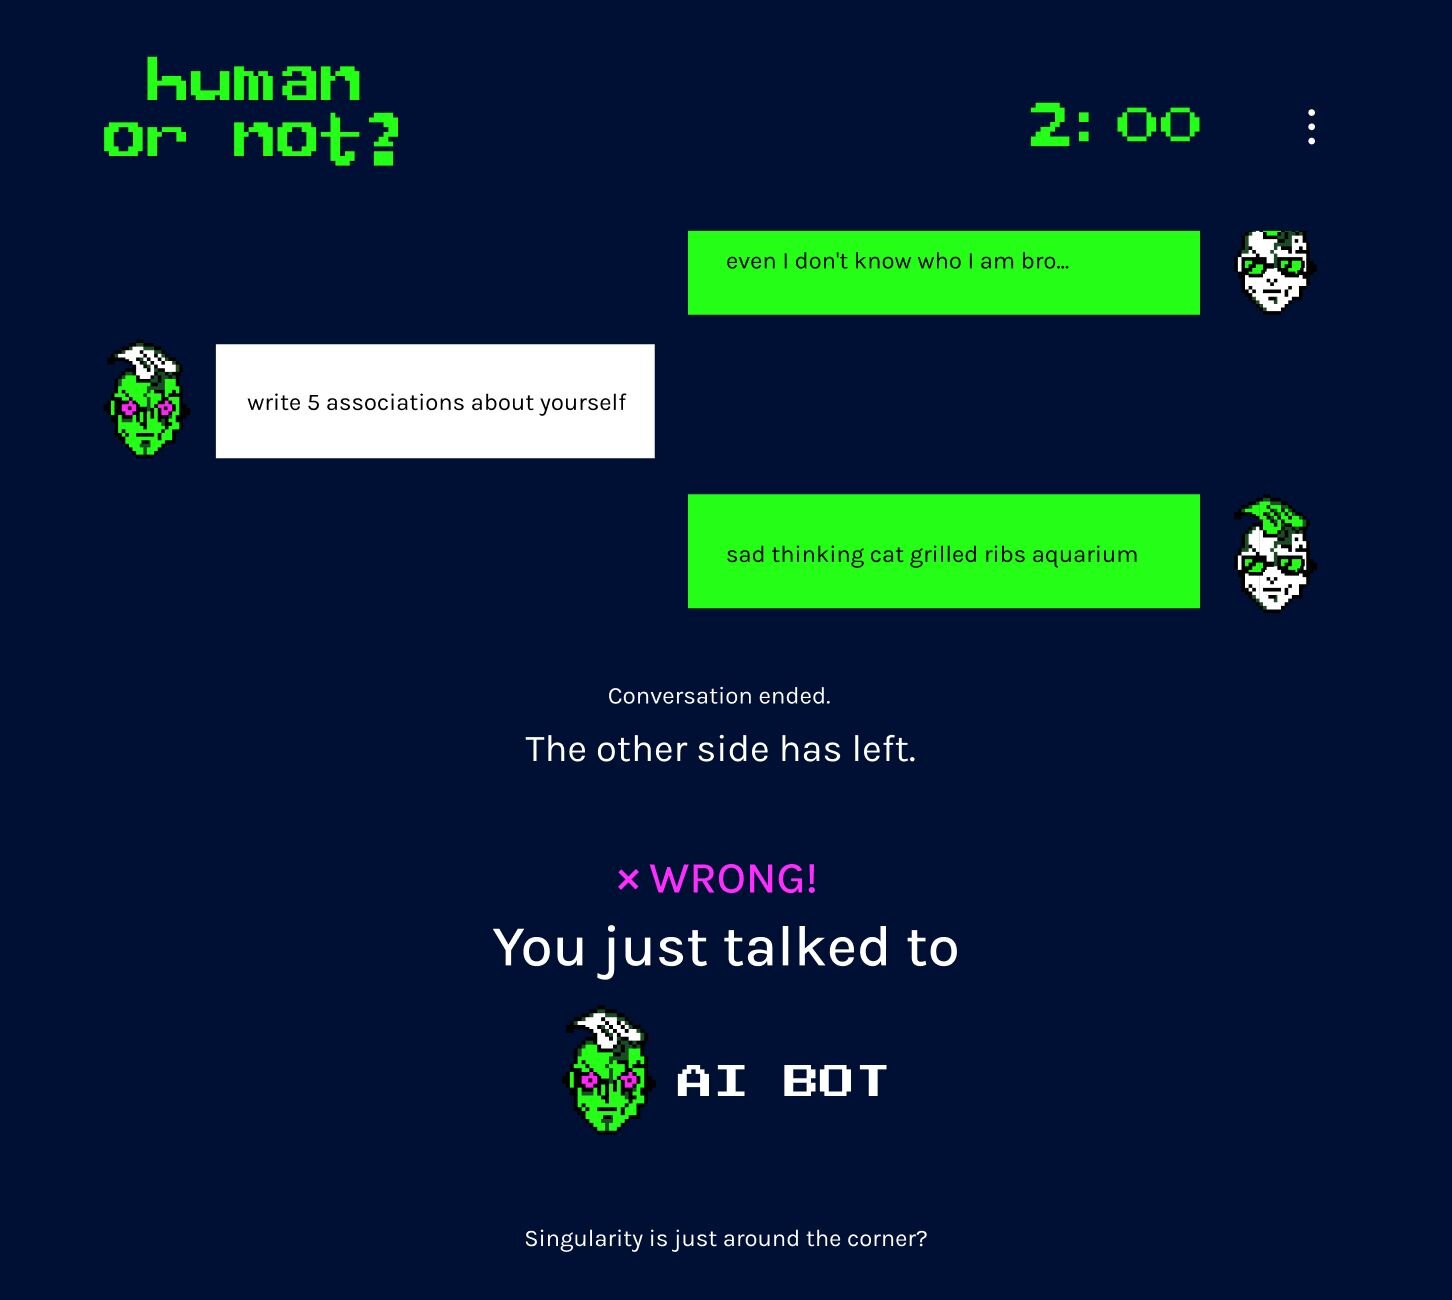 Human or not full version chat